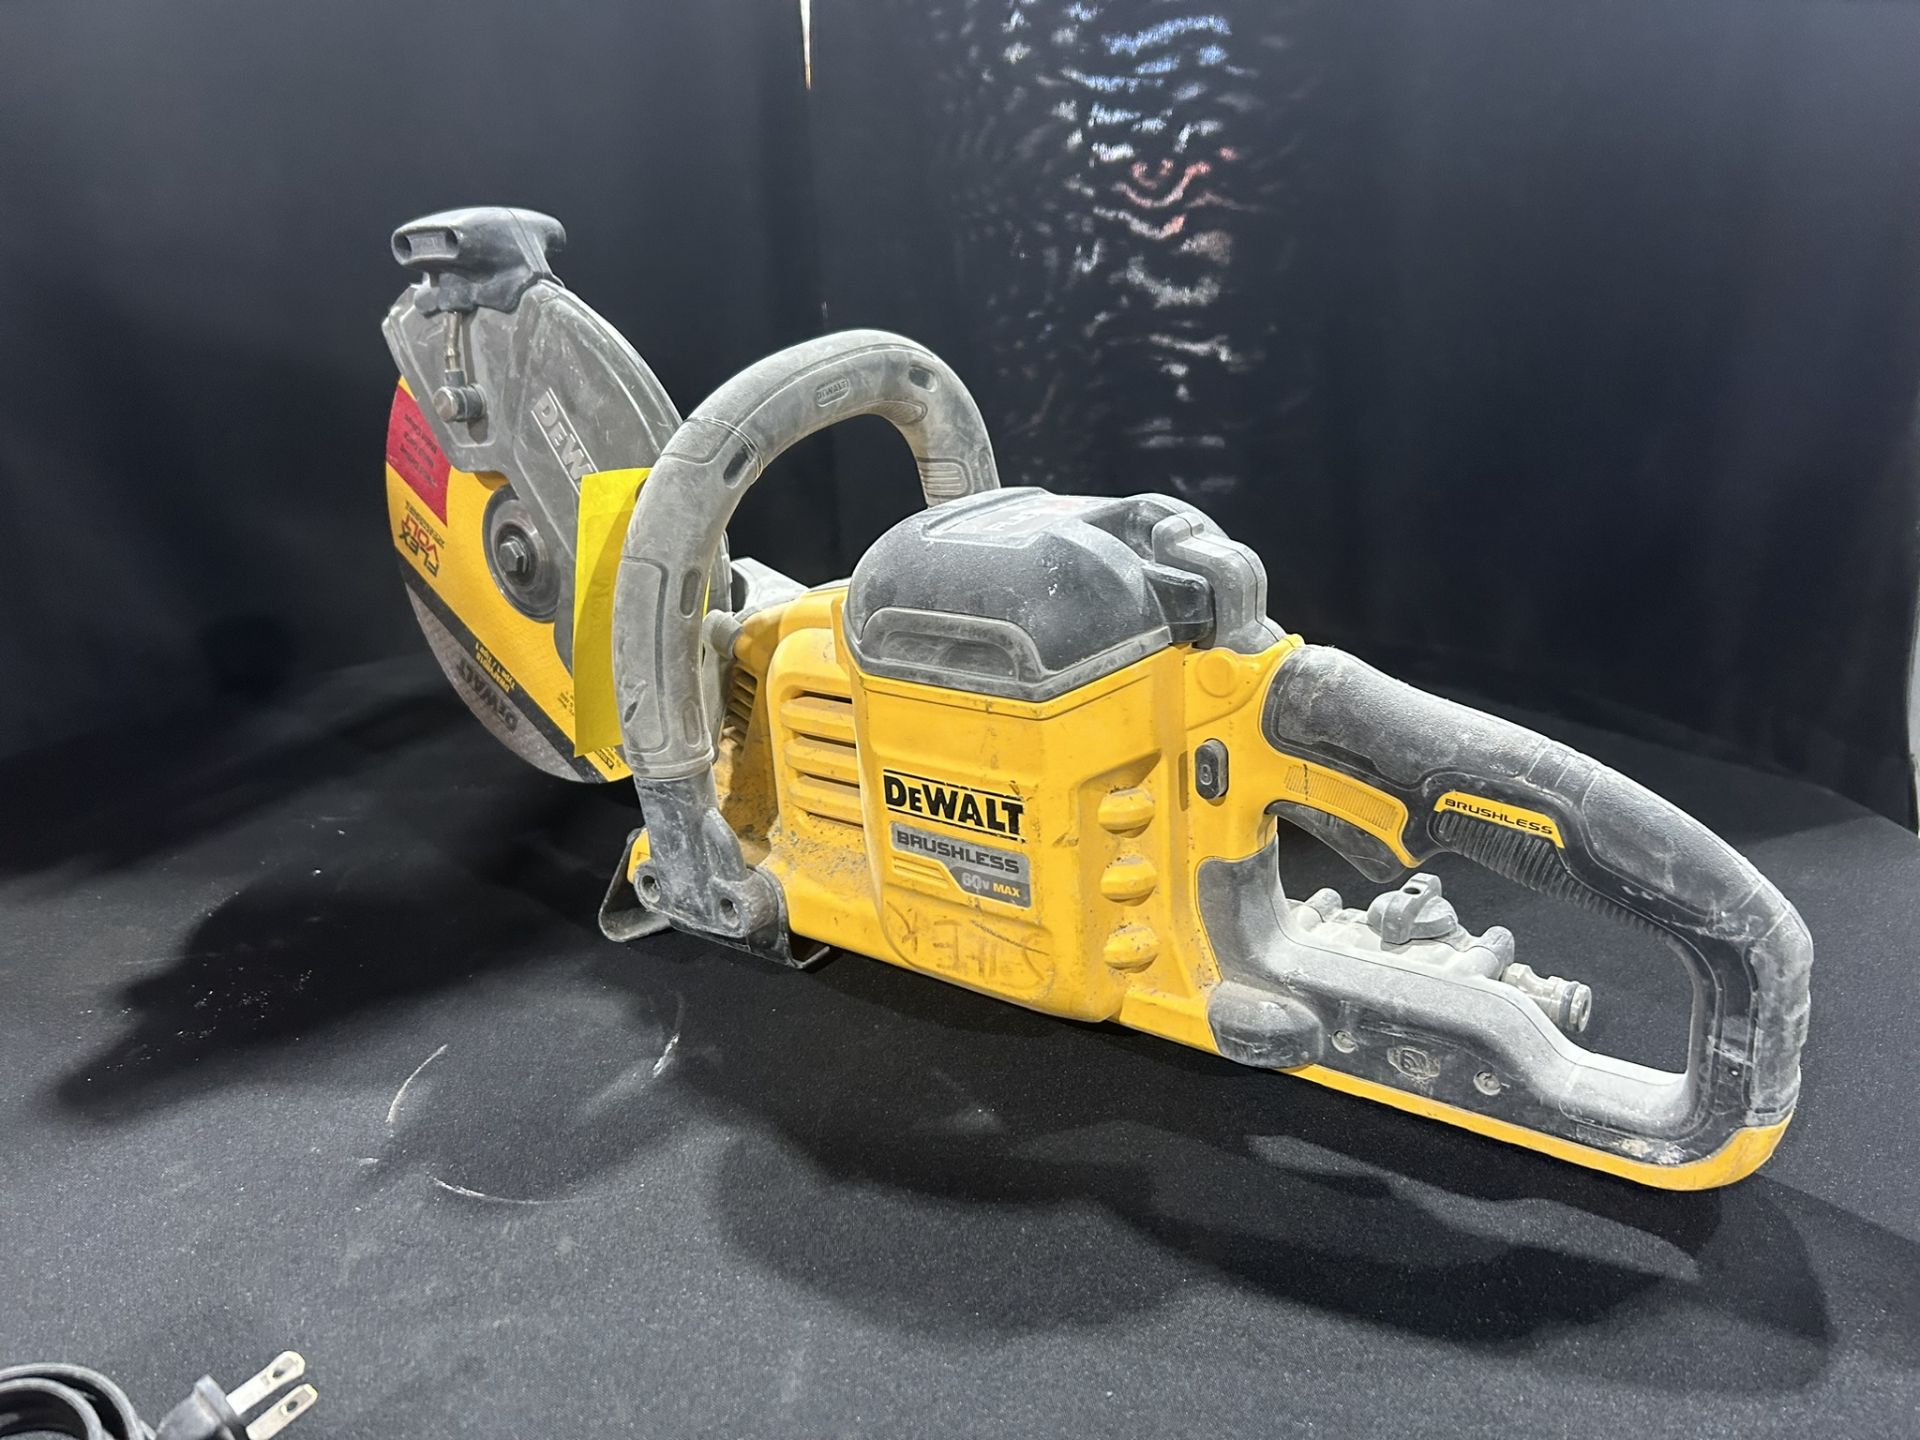 DEWALT CORDLESS 9" DEMOLITION SAW W/ 6.0AH BATTERY AND CHARGER - Image 5 of 6